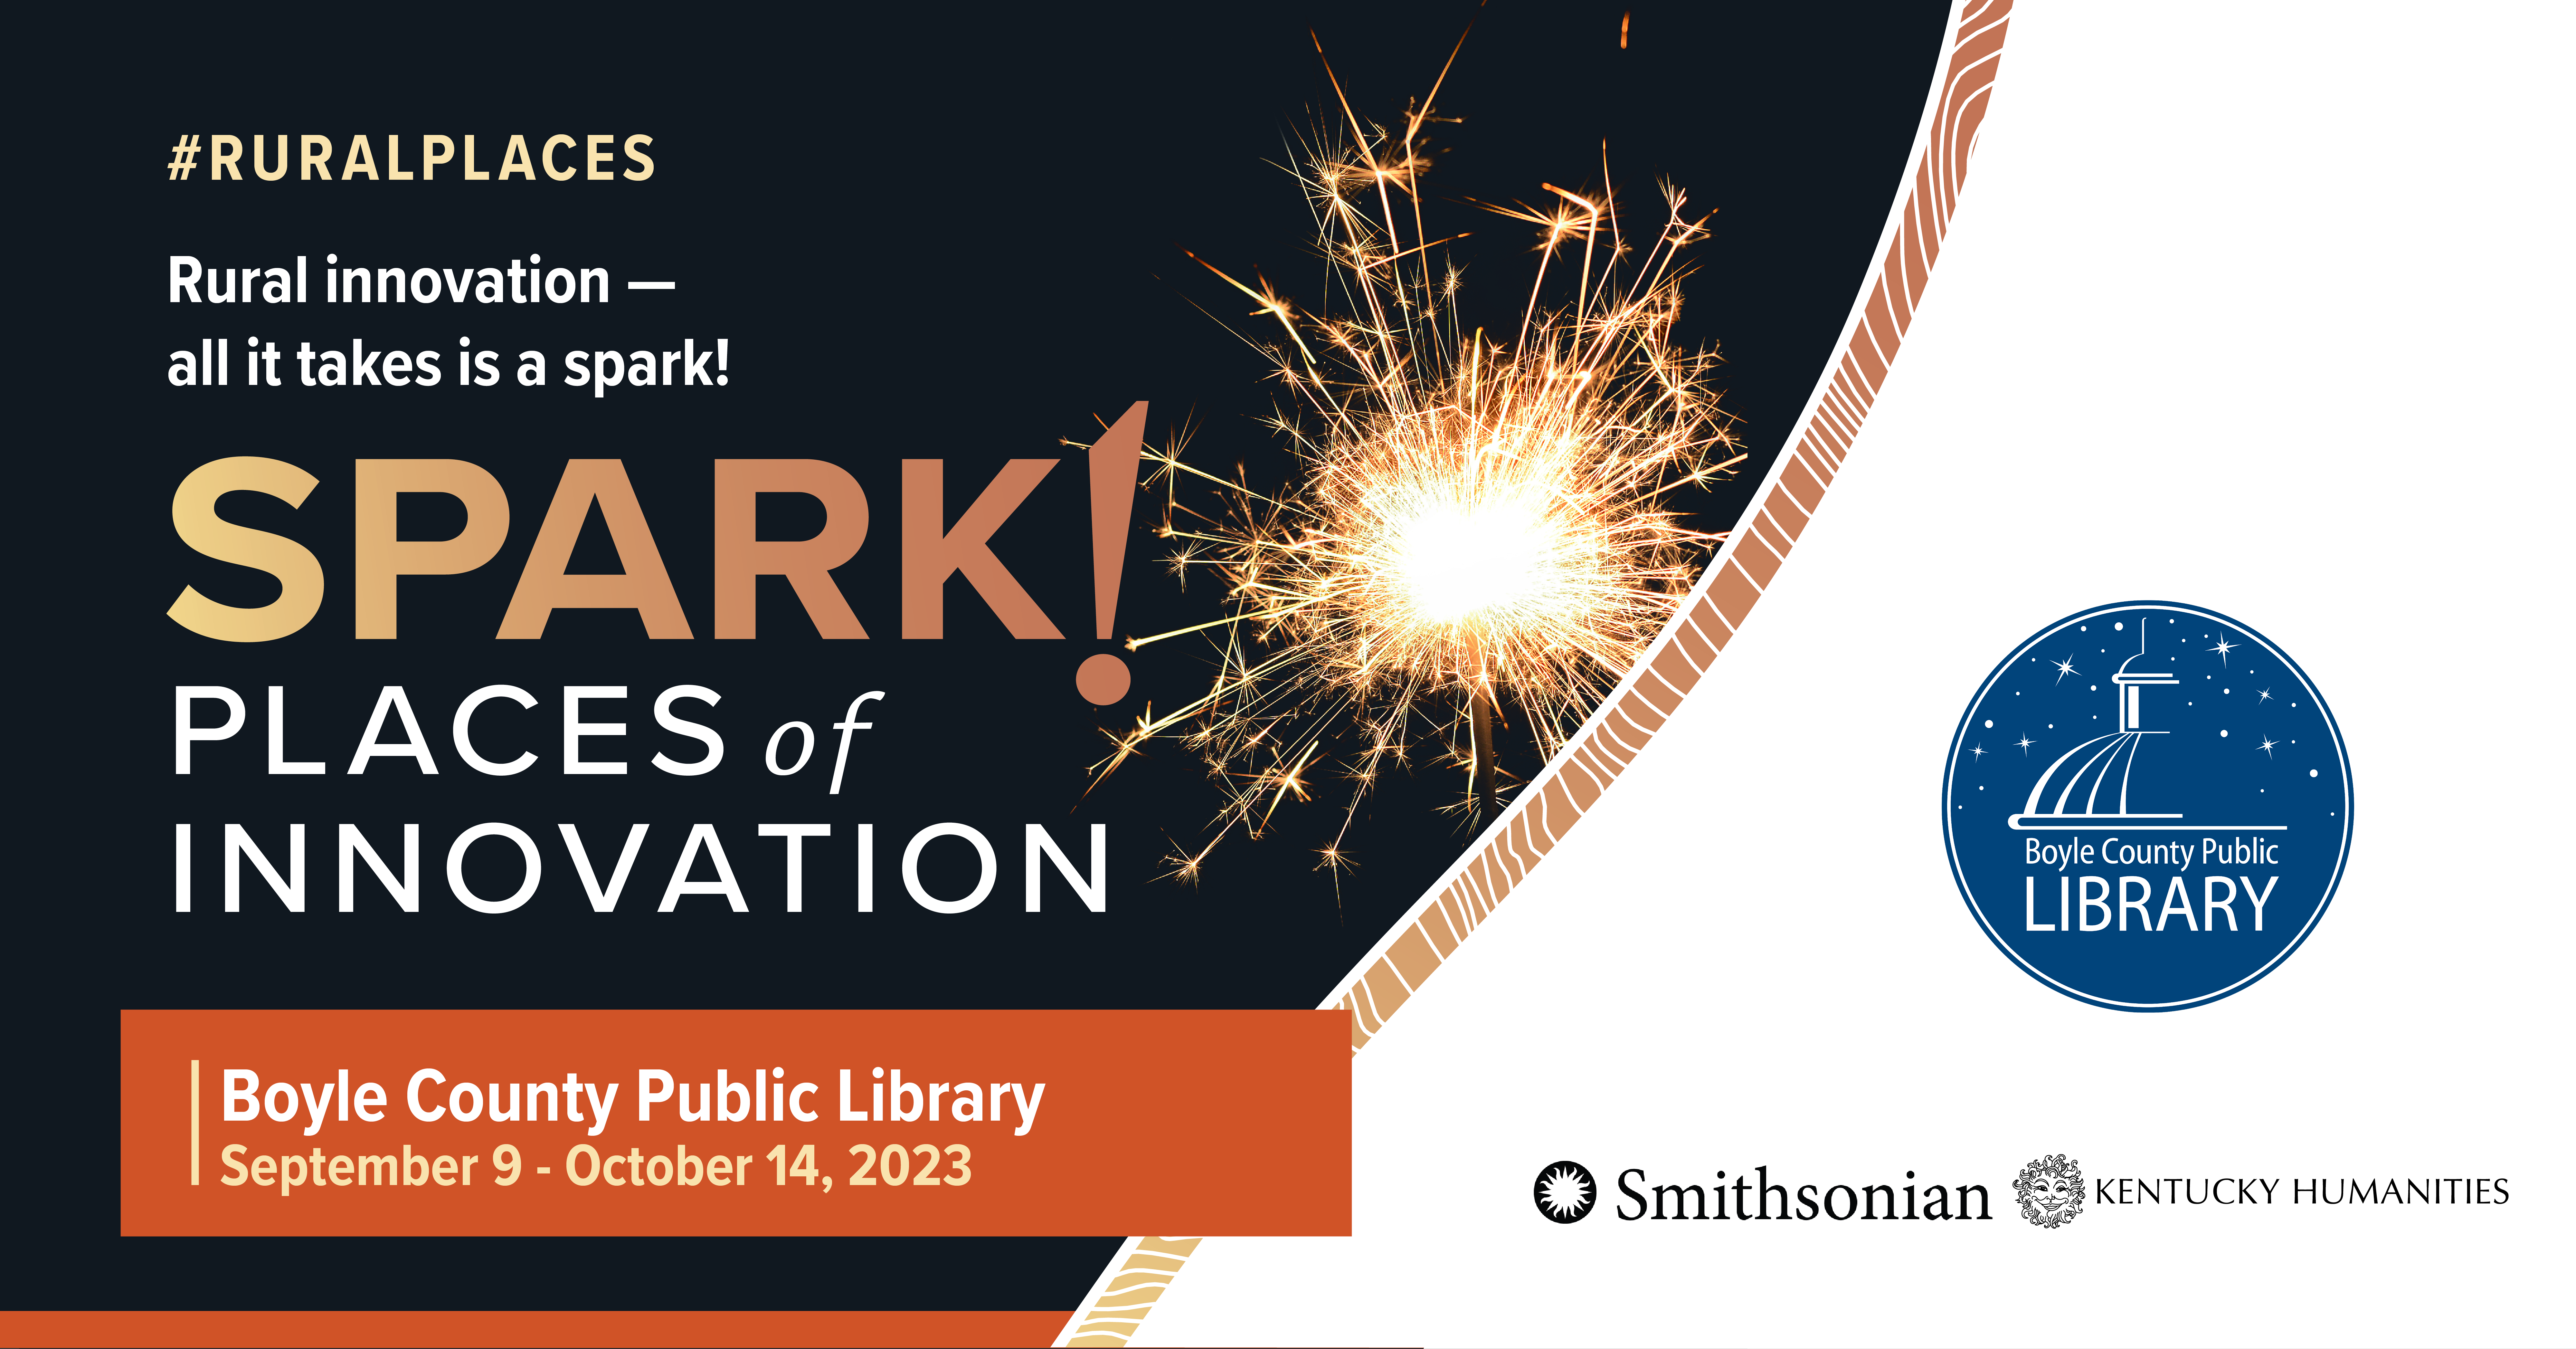 SPARK Places of Innovation Exhibit